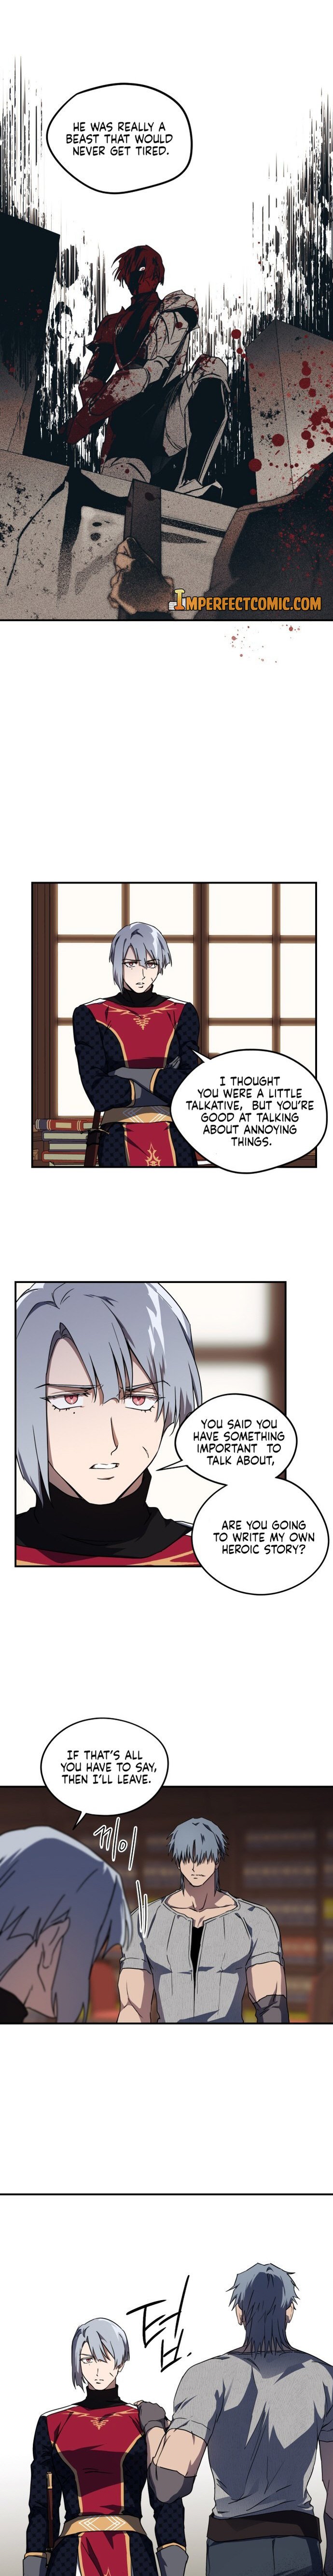 blinded-by-the-setting-sun-chap-45-14